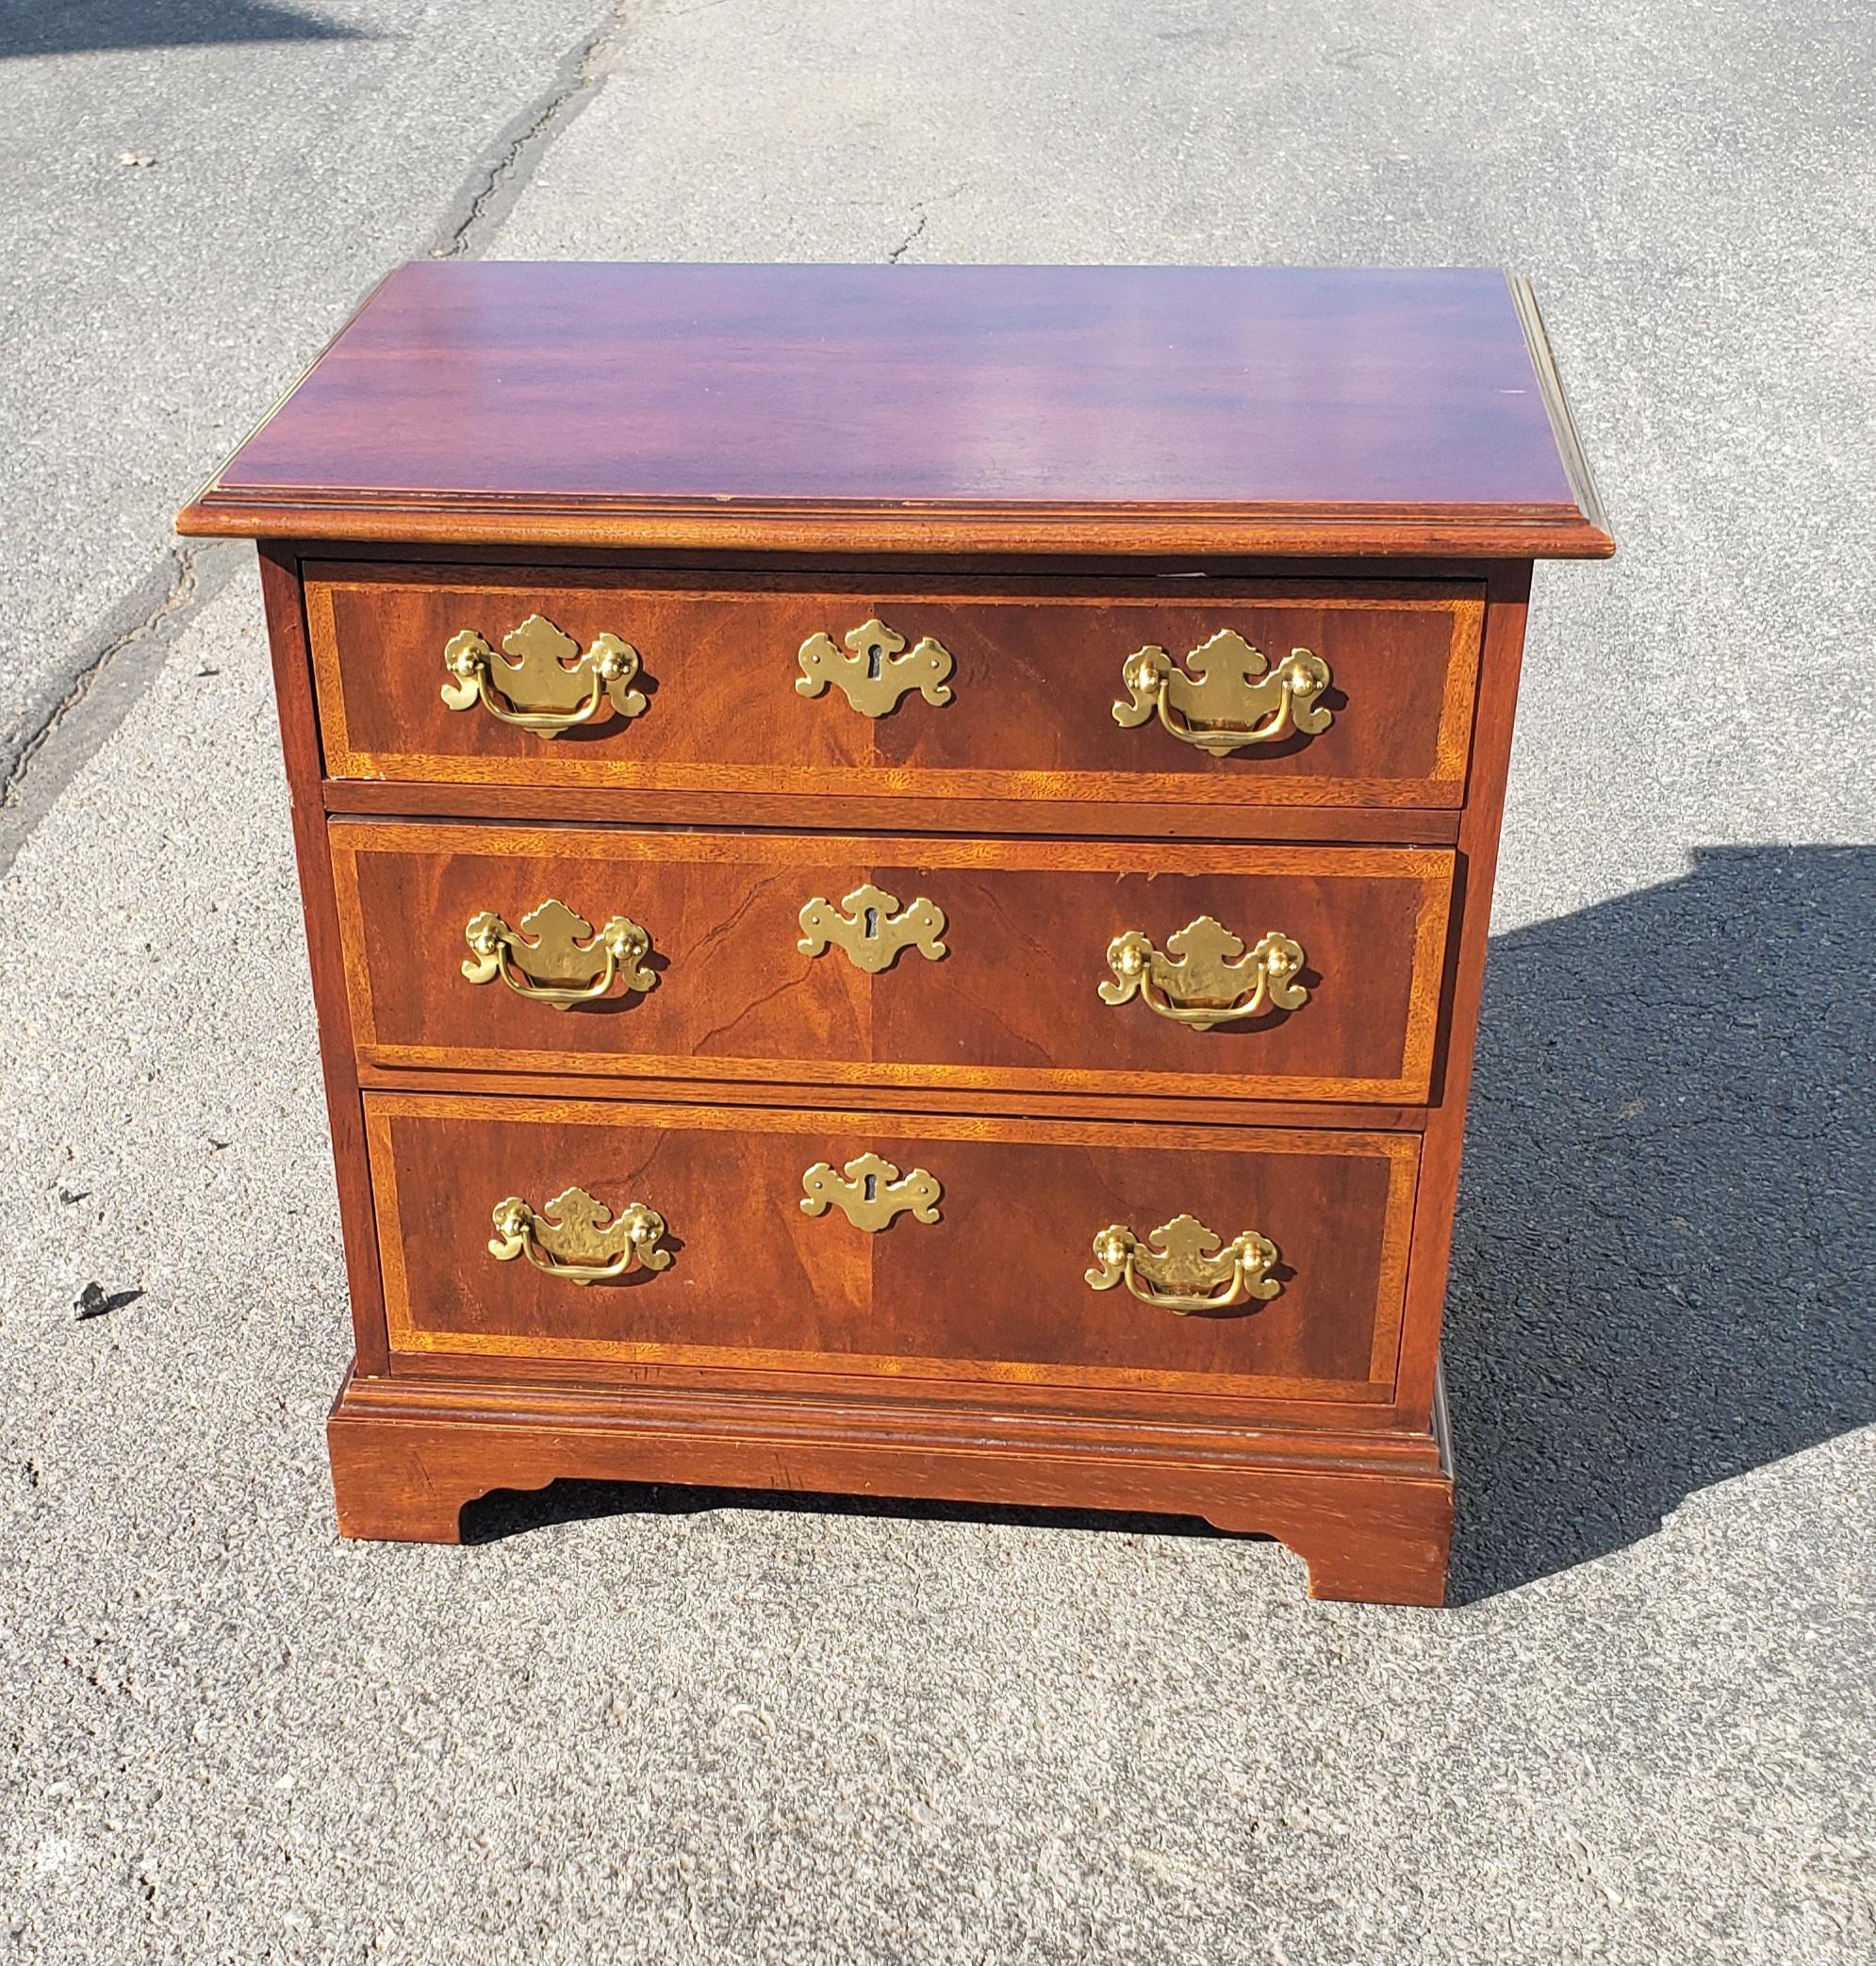 Baker Furniture Chippendale Mahogany and satinwood banded inlay side chest of drawers in very good vintage condition. Finished on all sides. Measures 23